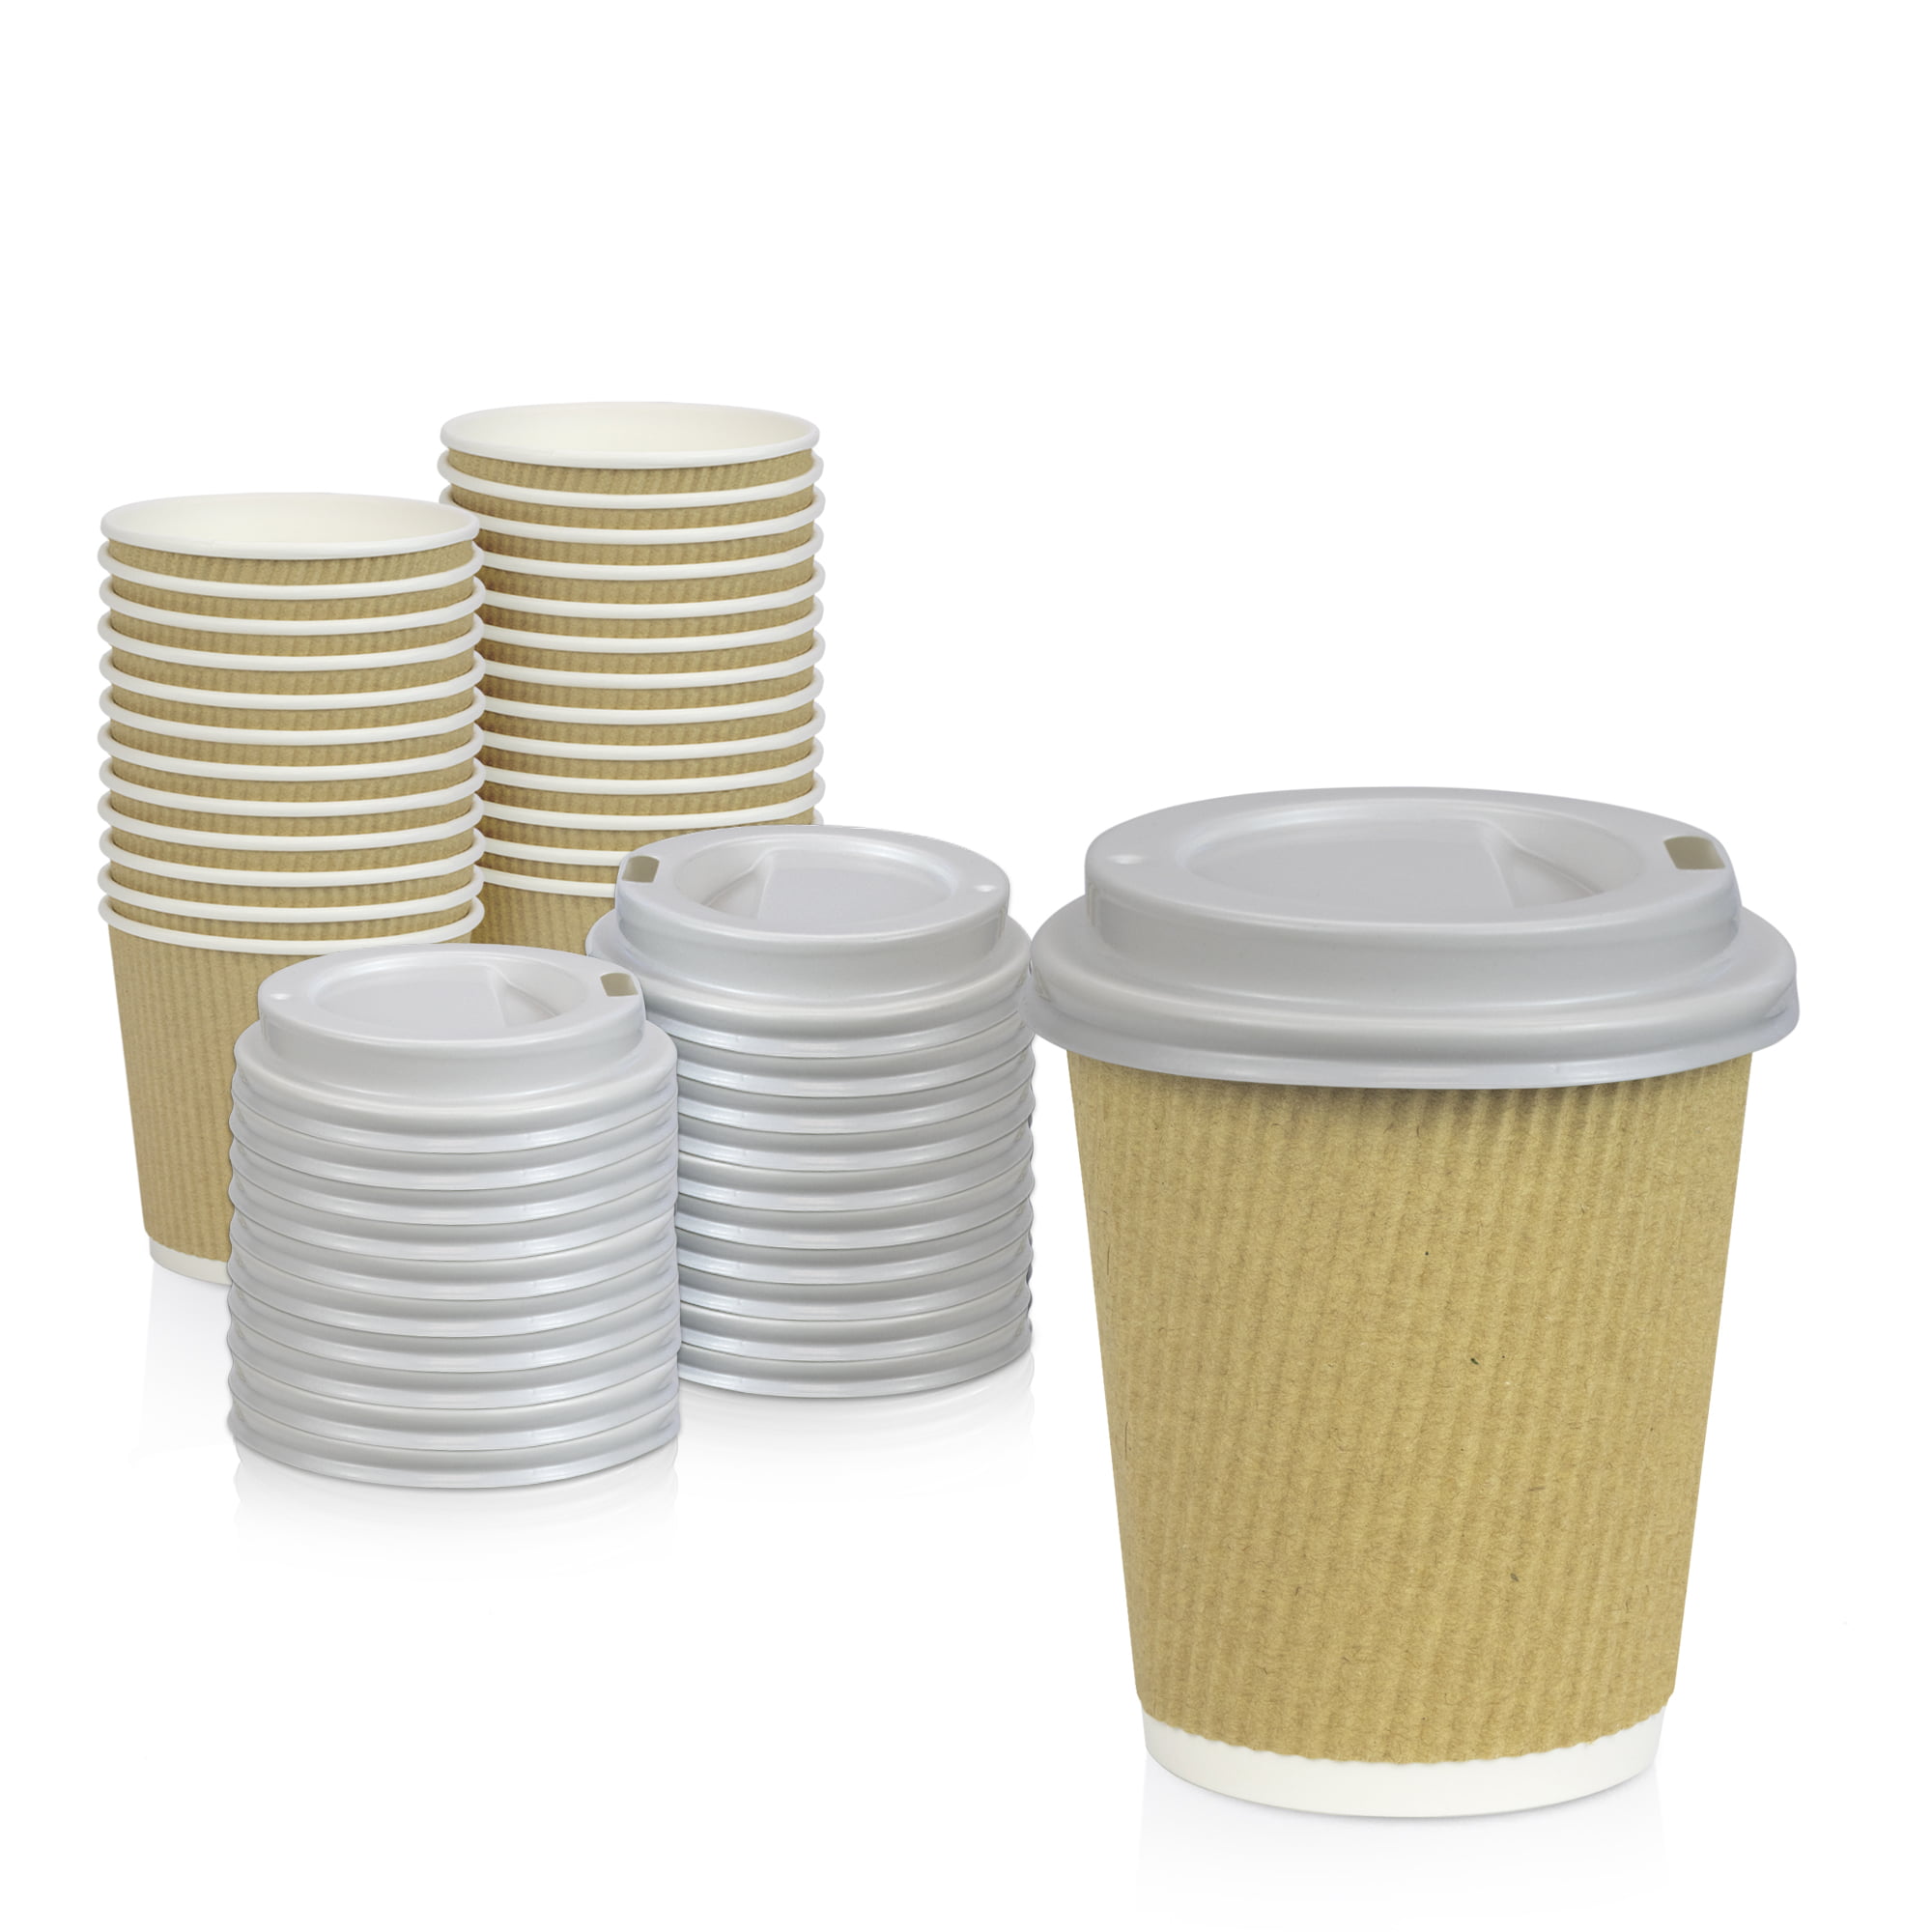 16oz Barista Cups Disposable Paper Coffee Cups Black White Double Wall Sip Lids 